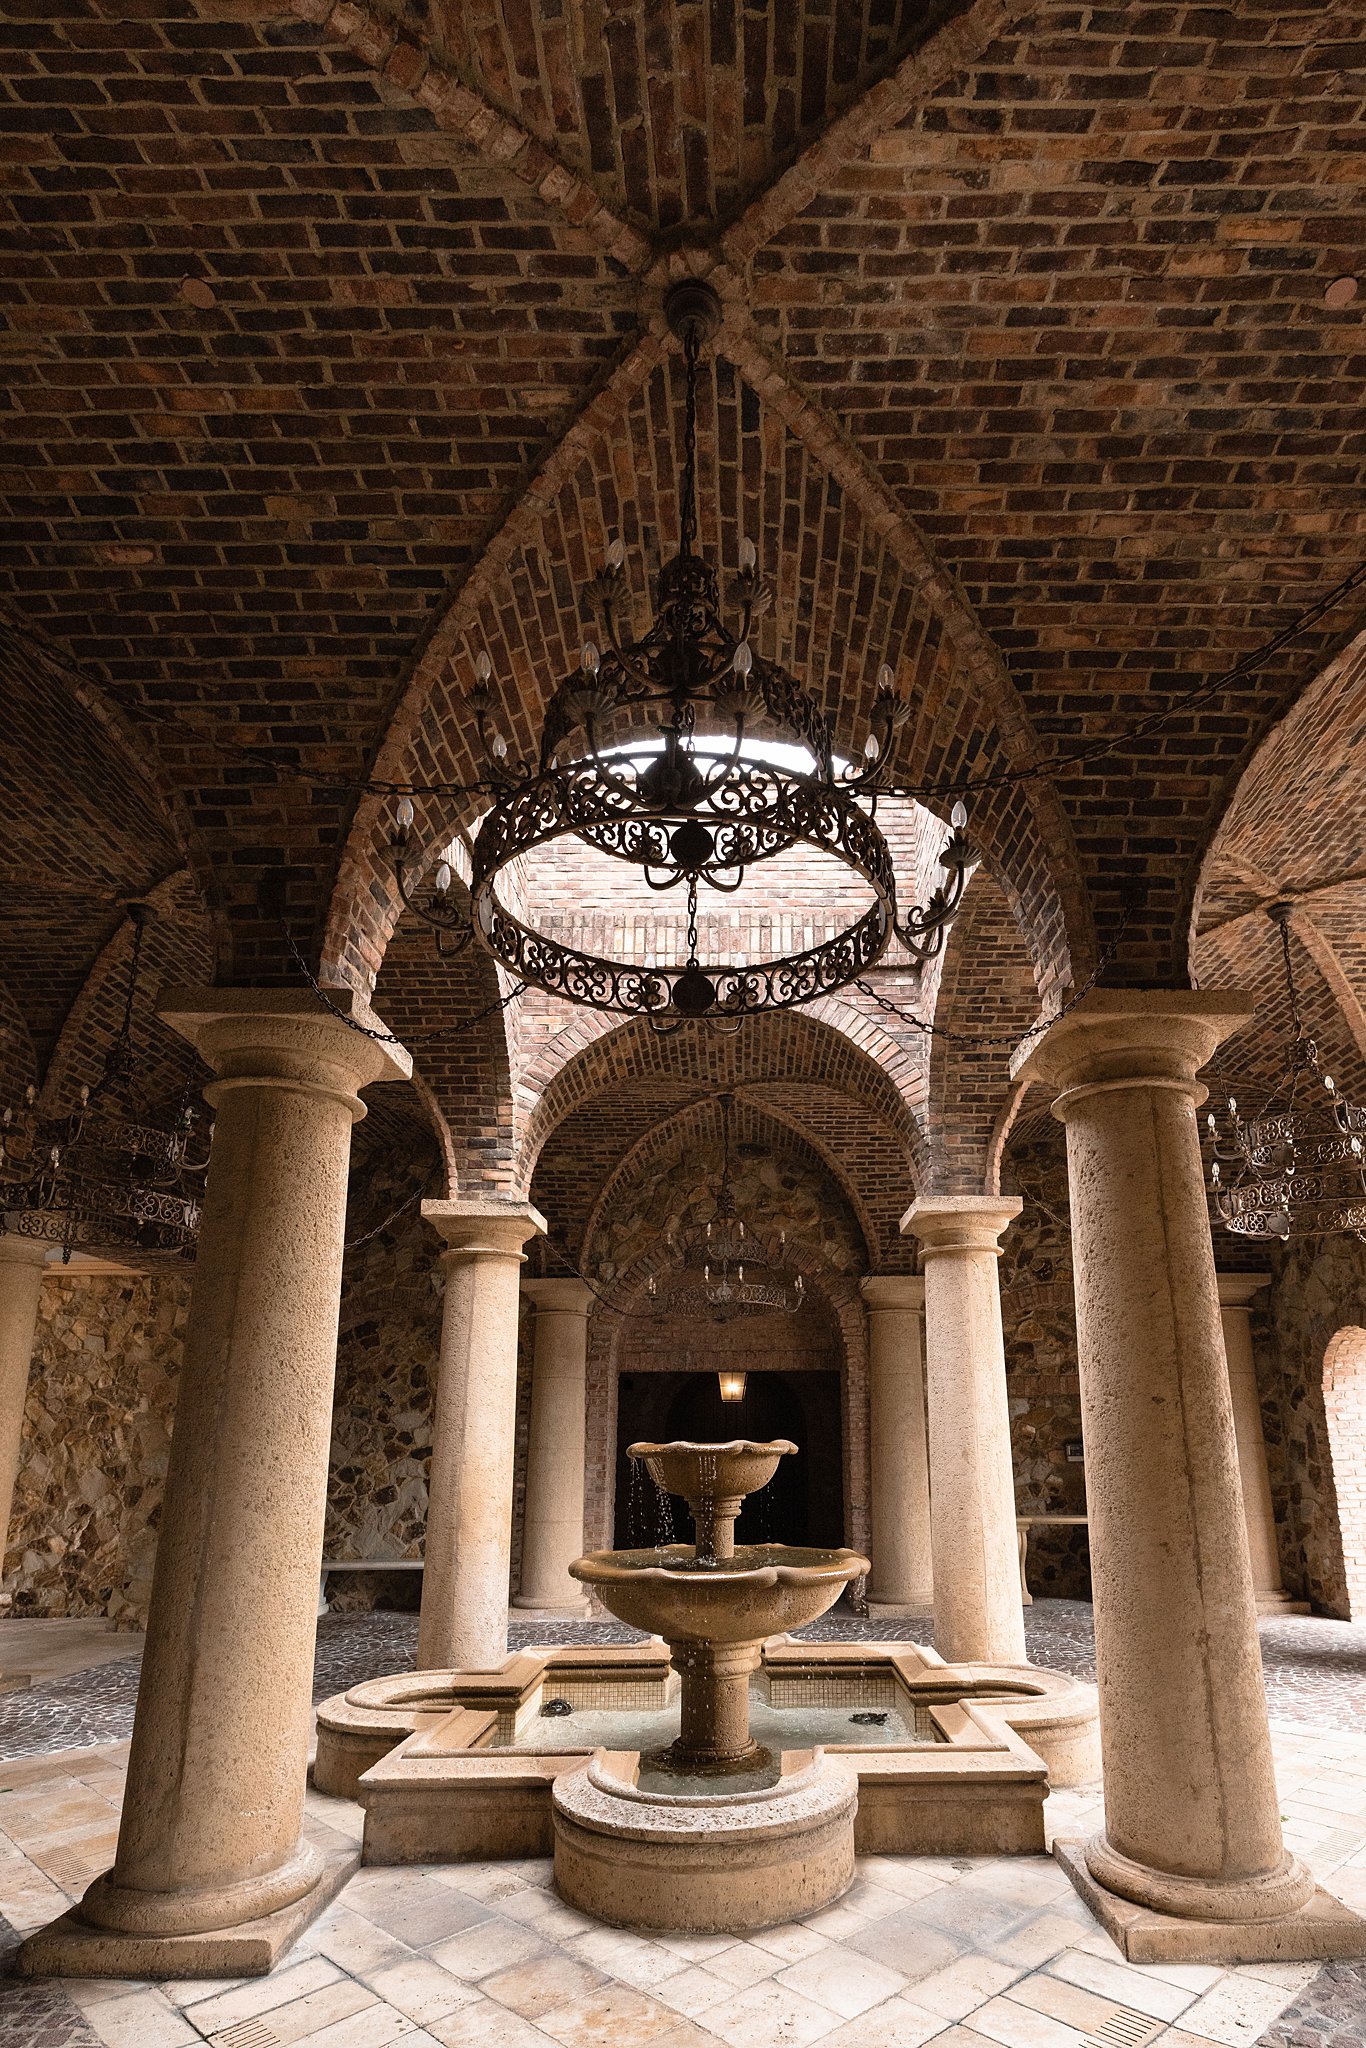 Details of an ornate fountain and open roof structure at the club at bella collina wedding venue